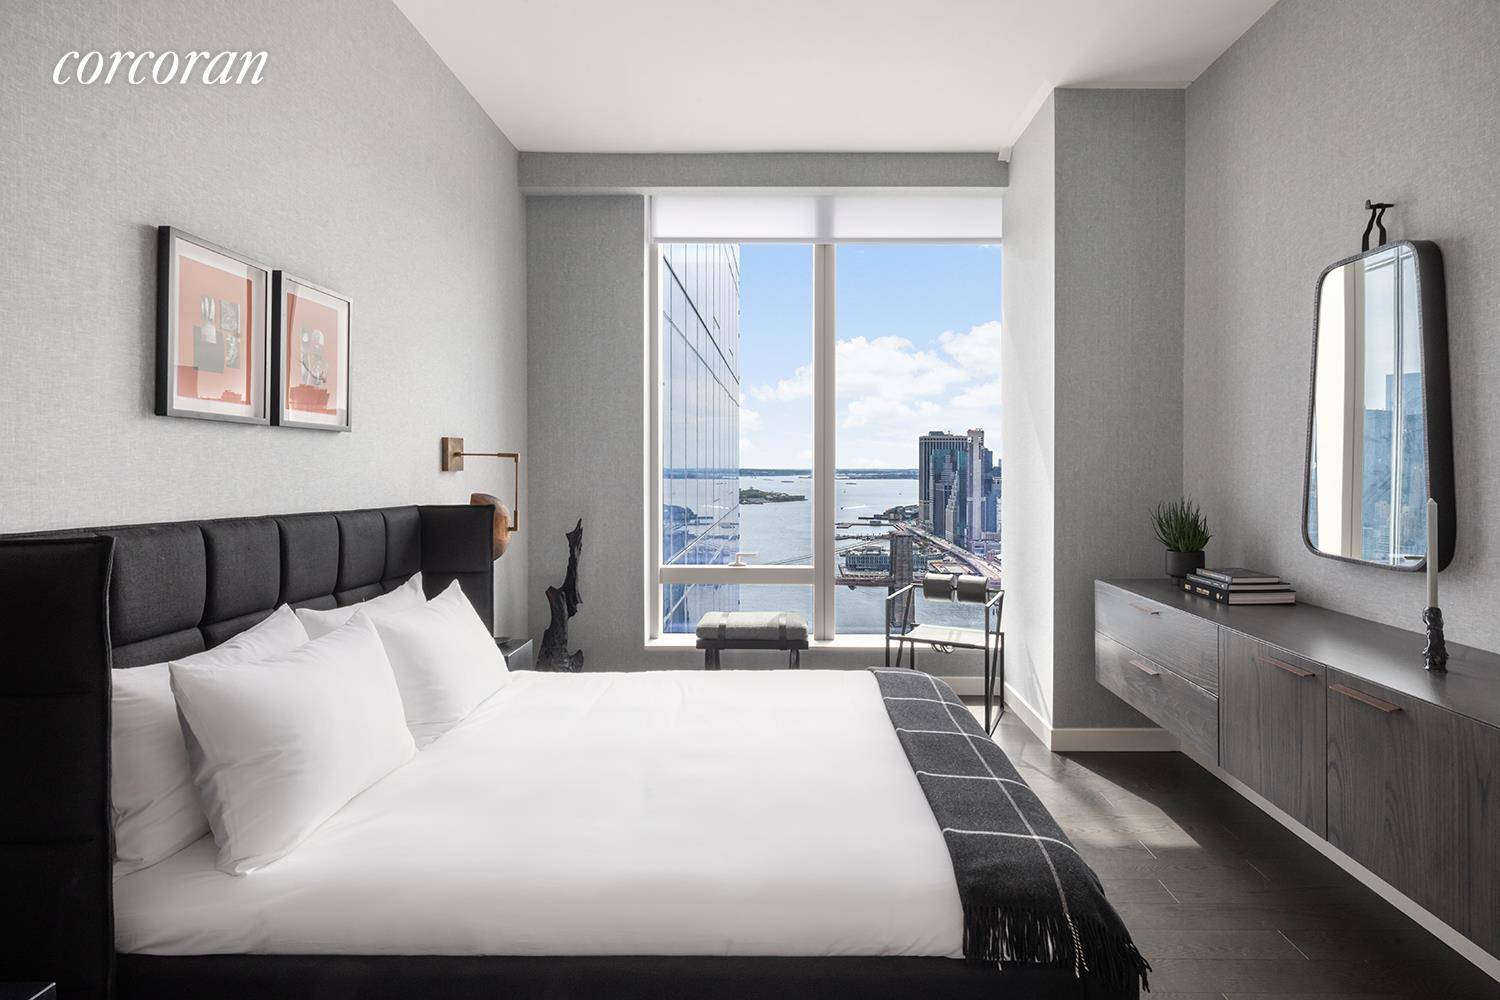 ONE MANHATTAN SQUARE OFFERS ONE OF THE LAST 20 YEAR TAX ABATEMENTS AVAILABLE IN NEW YORK CITY Special Features This resident features 12' ceilings.